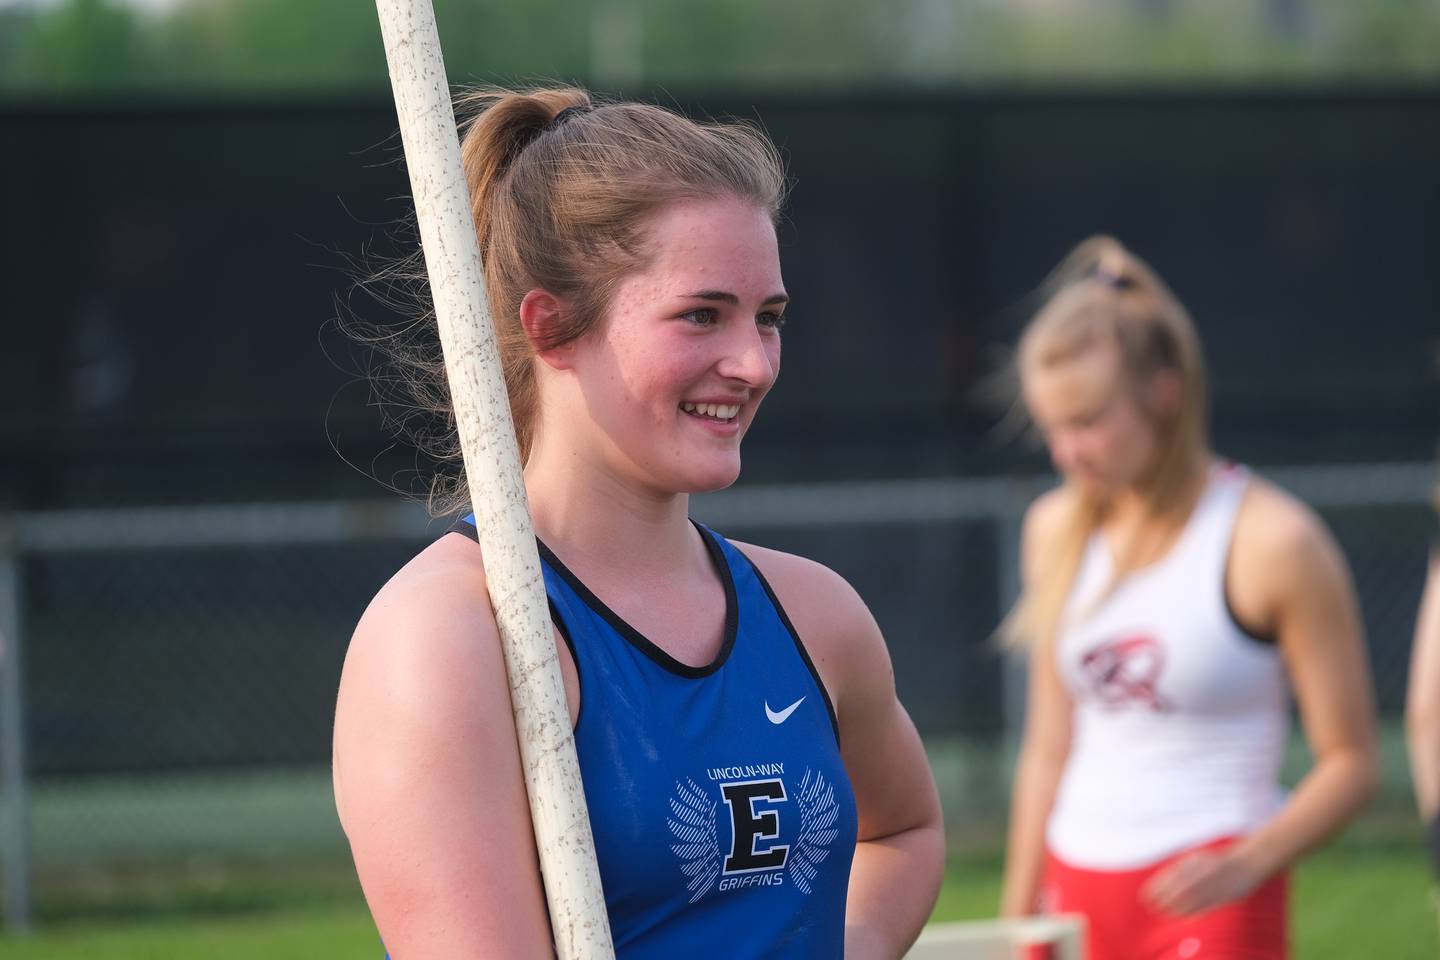 Lincoln-Way East’s Jaiden Knoop wait to make another attempt in the pole vault at the Class 3A Minooka Girls Sectionals. Wednesday, May 11, 2022, in Minooka.